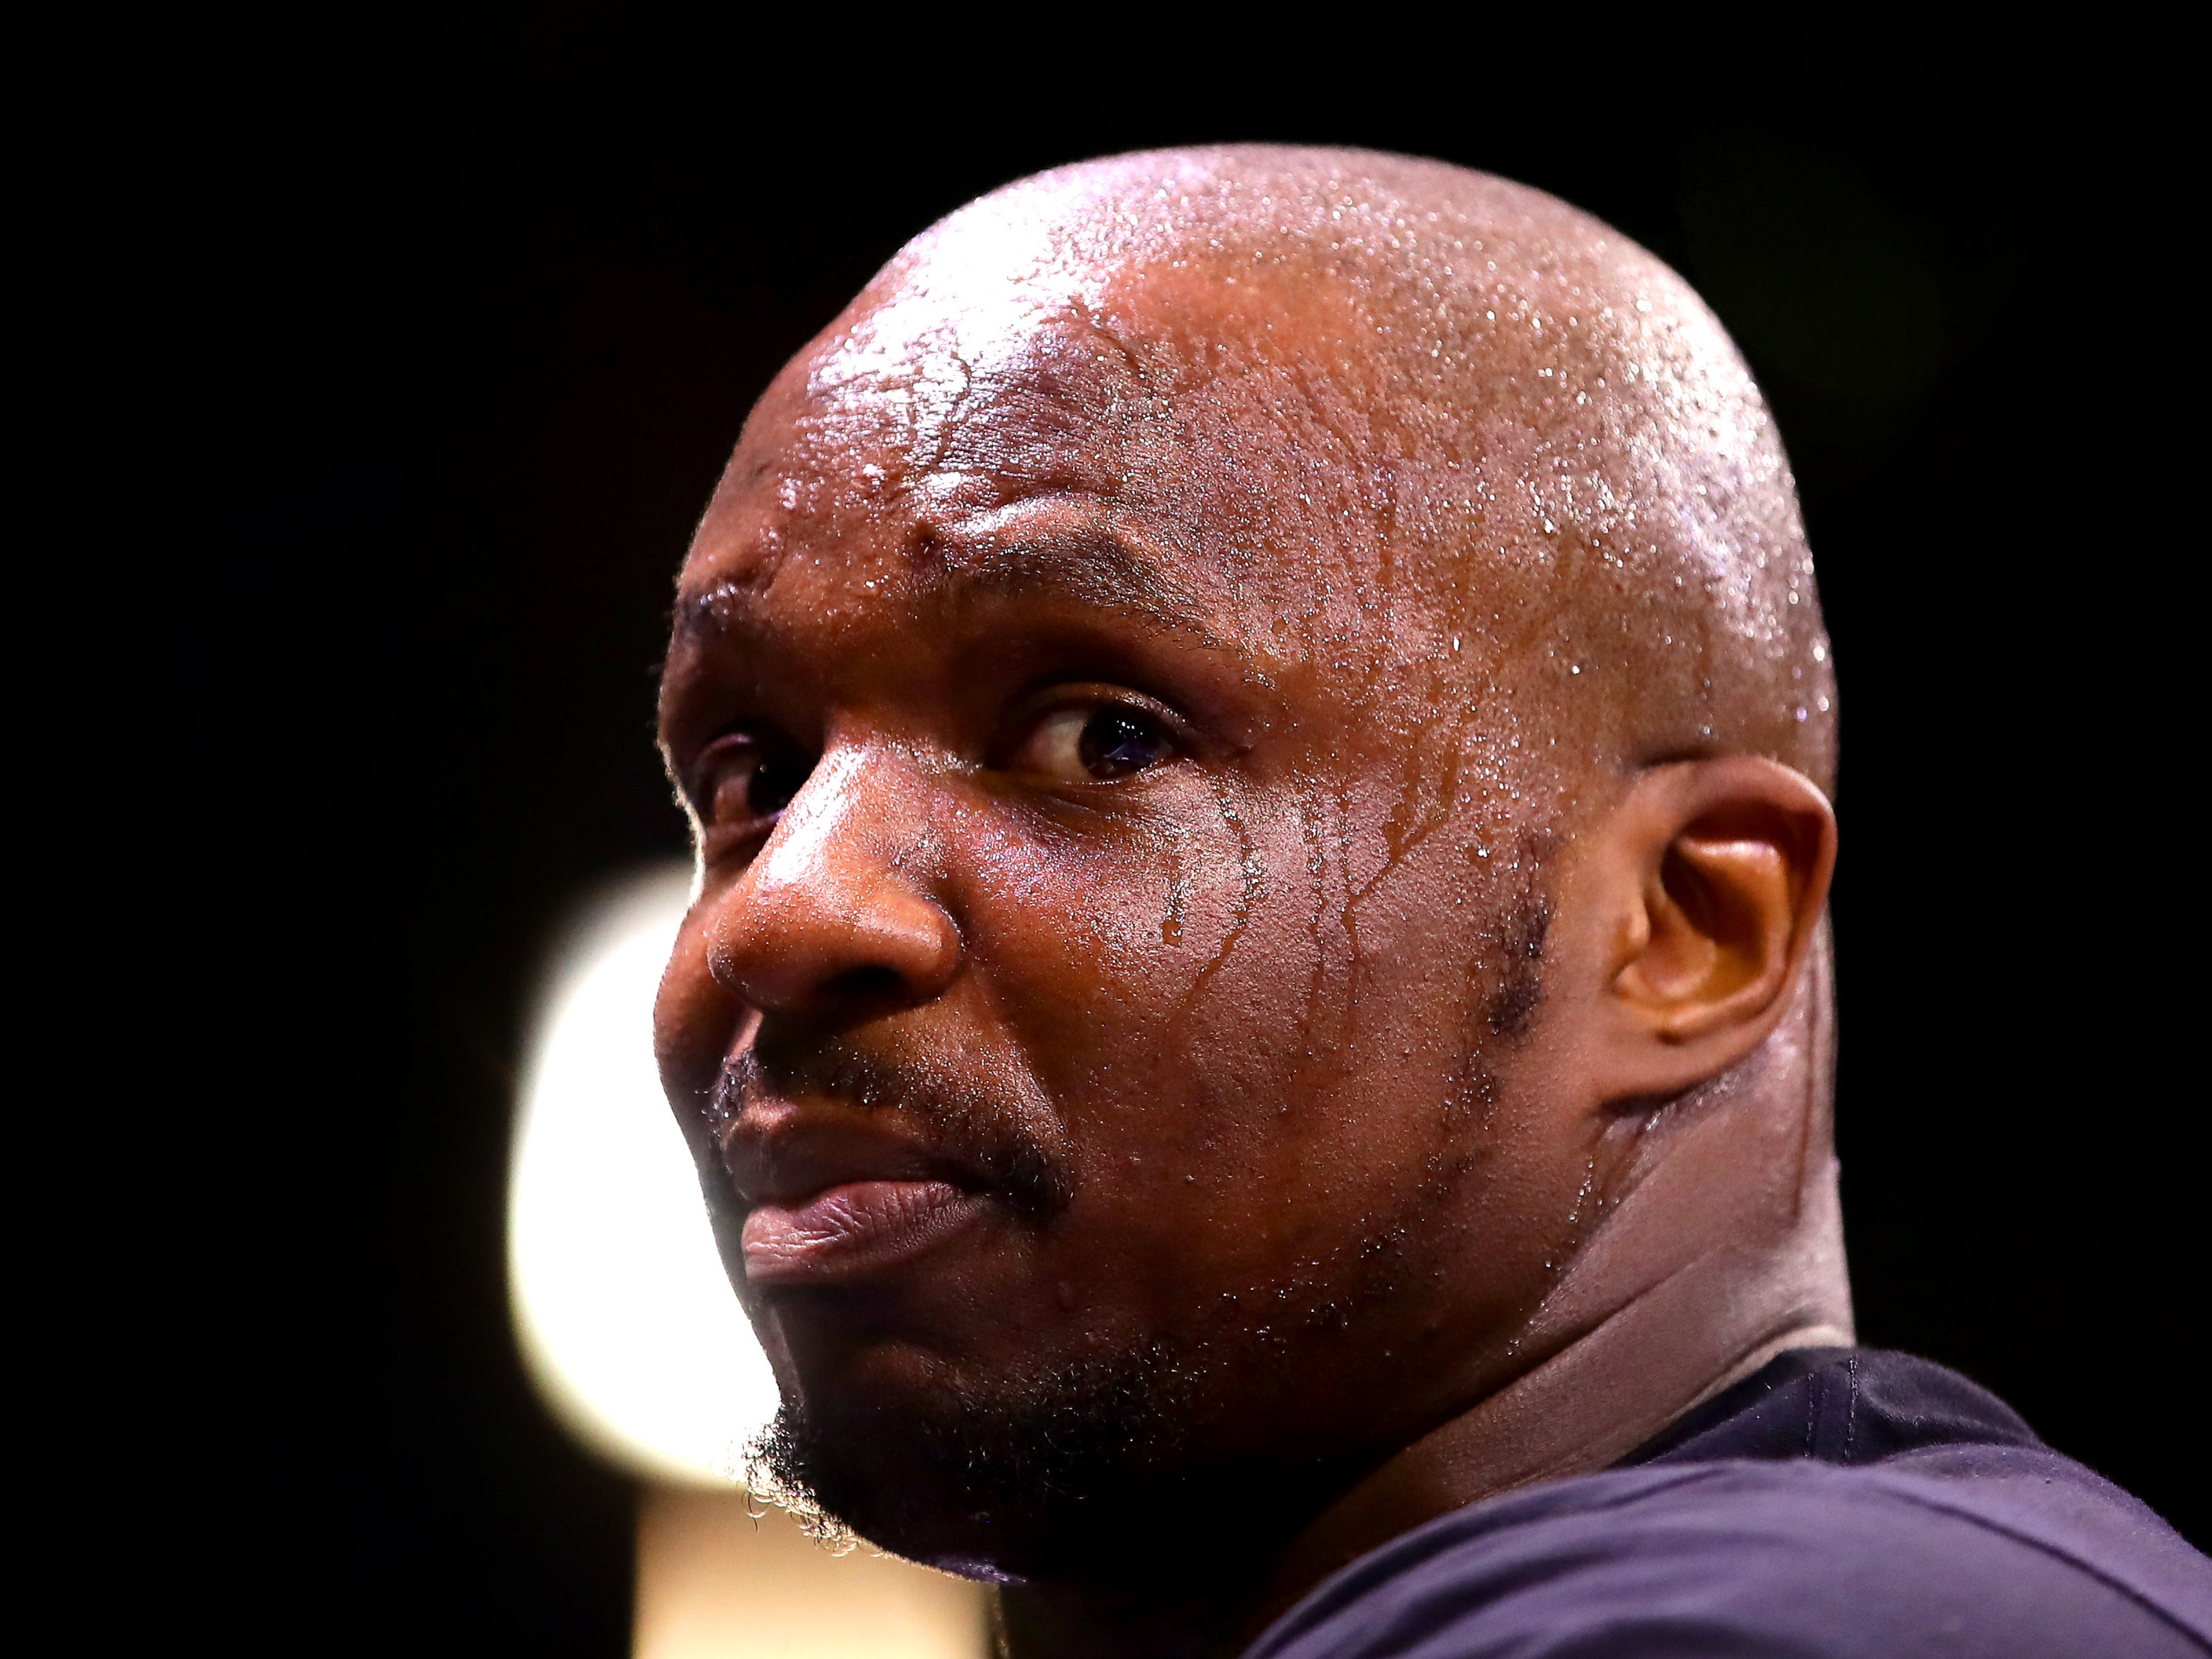 Dillian Whyte will challenge Tyson Fury for the WBC heavyweight title in April